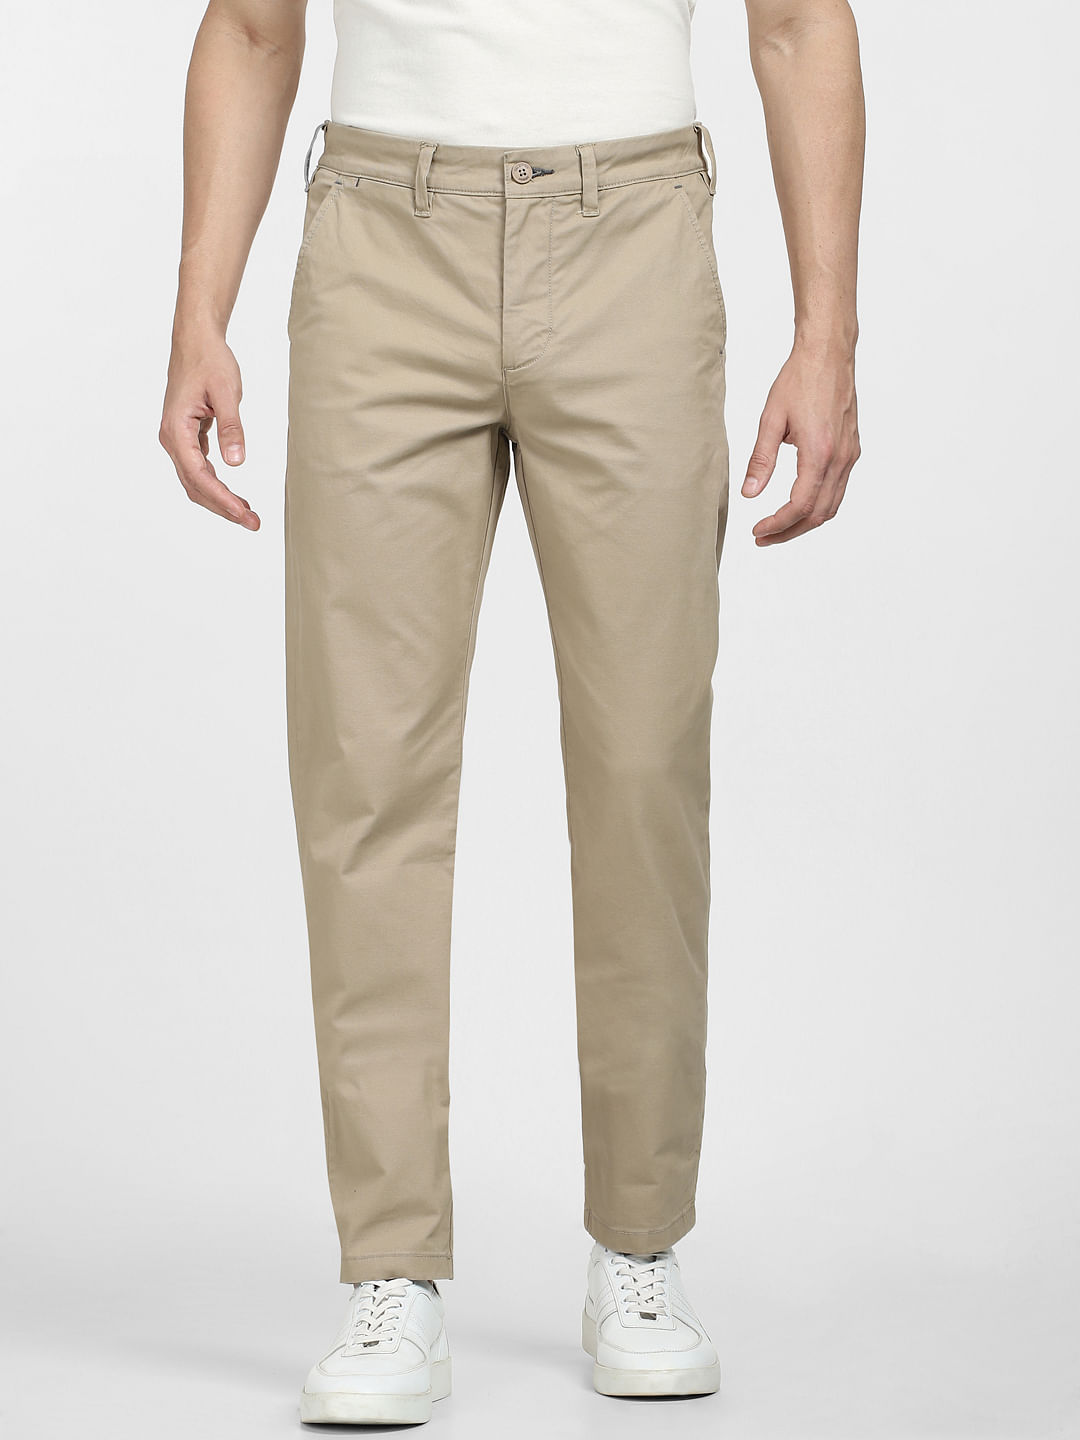 Vedolay Men Trousers Pants Men's Summer and Fashionable Cotton and Linen  Trousers Thick Yoga Pants,Brown L - Walmart.com